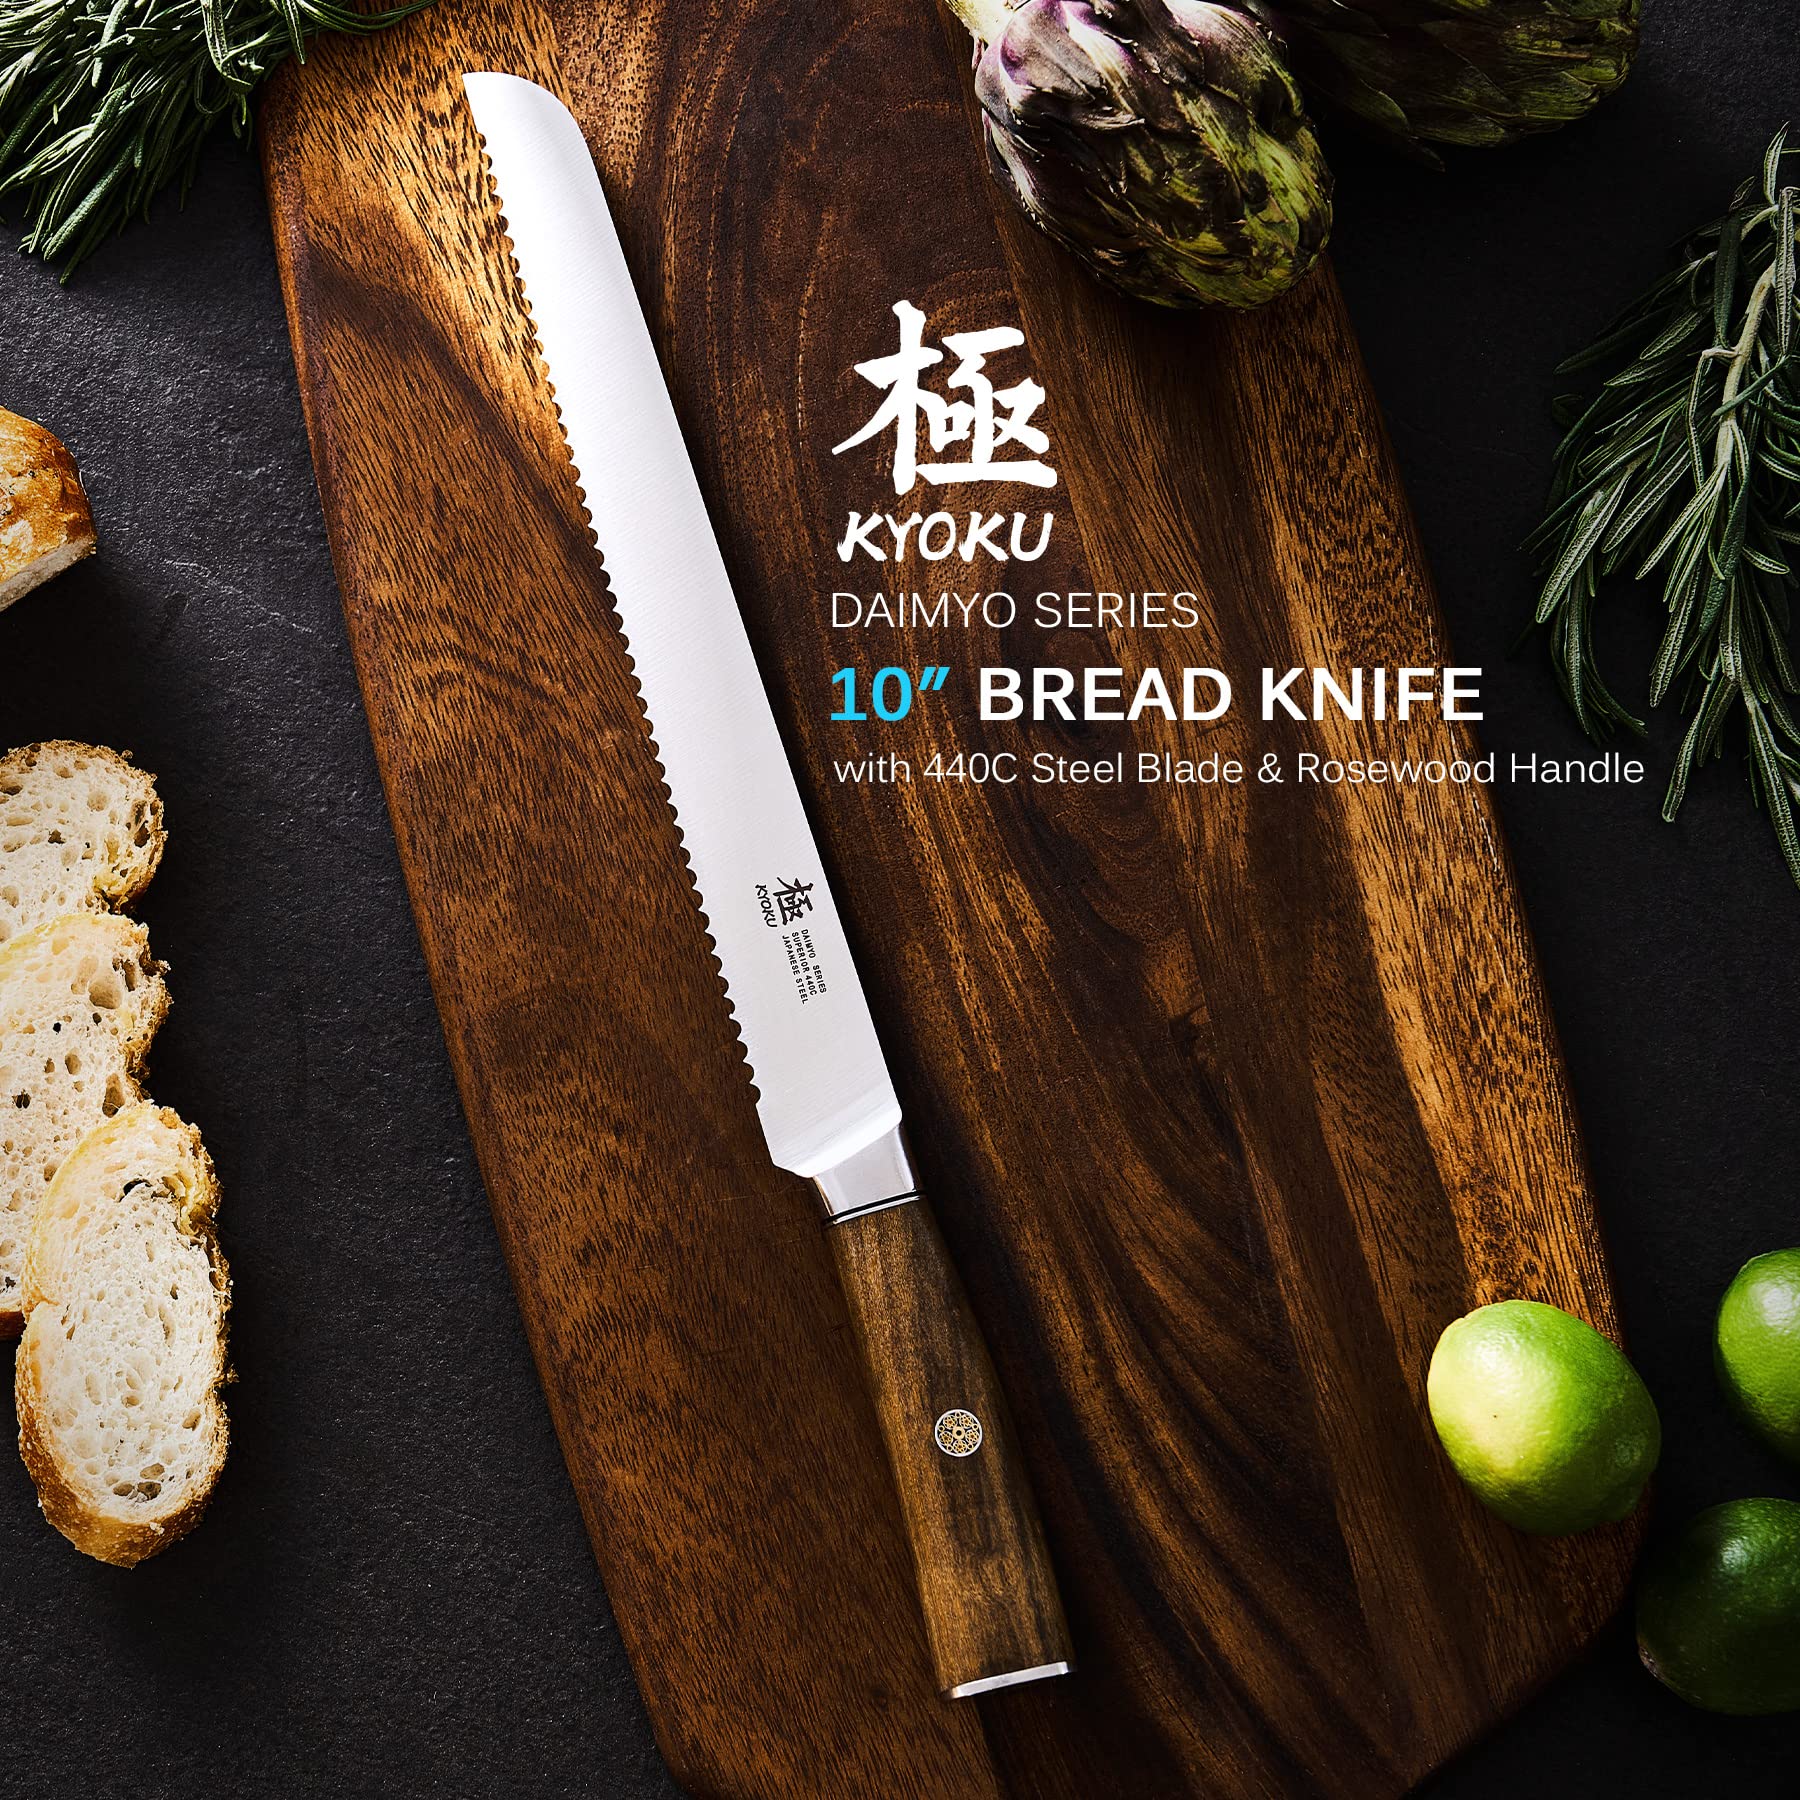 KYOKU 10 Inch Bread Knife - Daimyo Series - Serrated Knife with Ergonomic Rosewood Handle, and Mosaic Pin - Japanese 440C Stainless Steel Bread Cutter with Sheath and Case